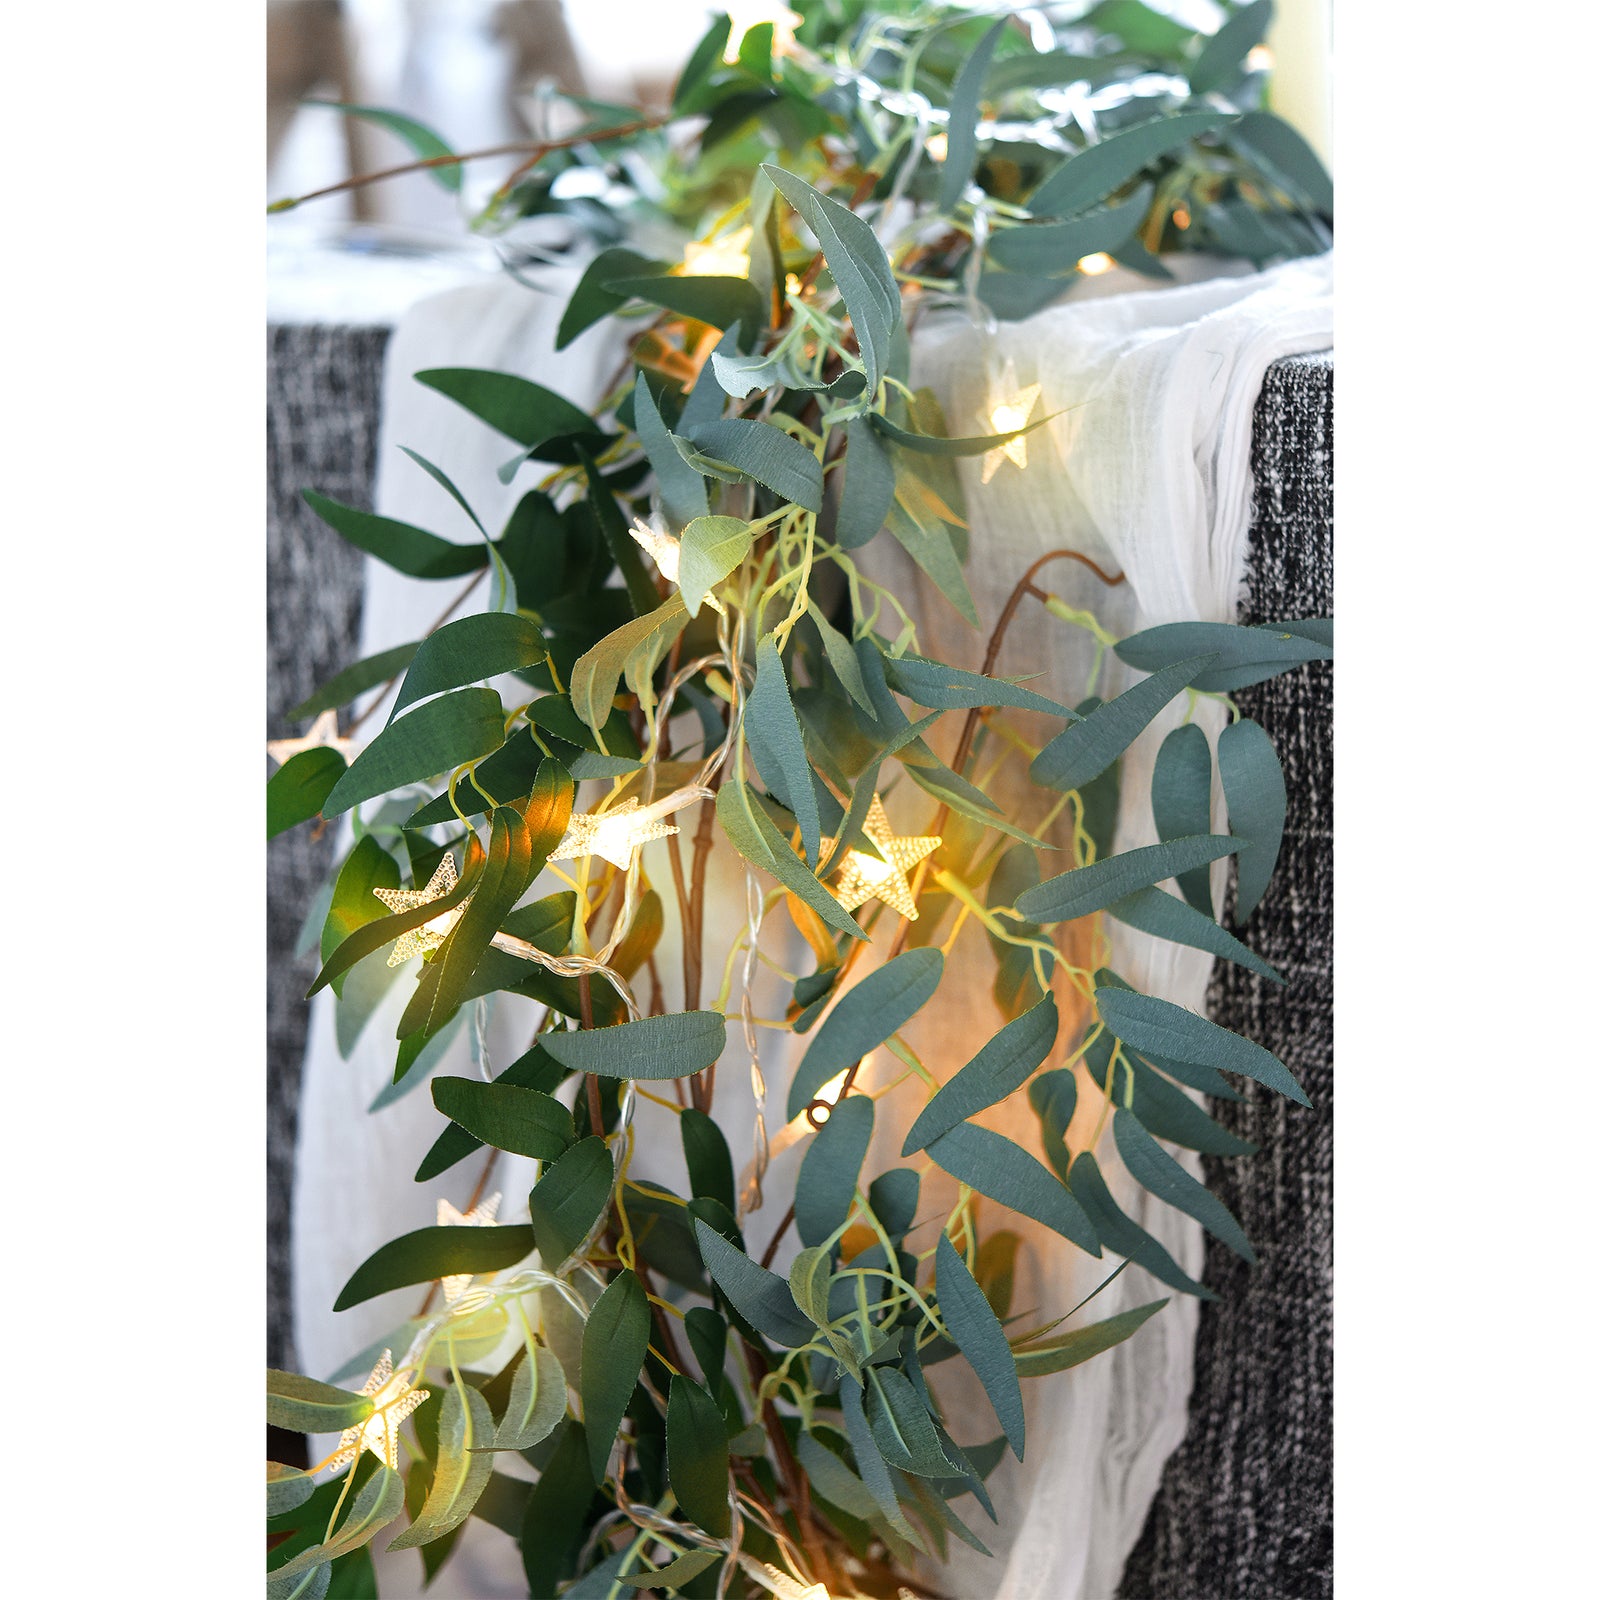 2 Mix Rustic Willow Garlands, Bendable Artificial Greenery Vine Leaves for Wedding Home Decoration with 33 Feet Star String Lights (USB-Powered)